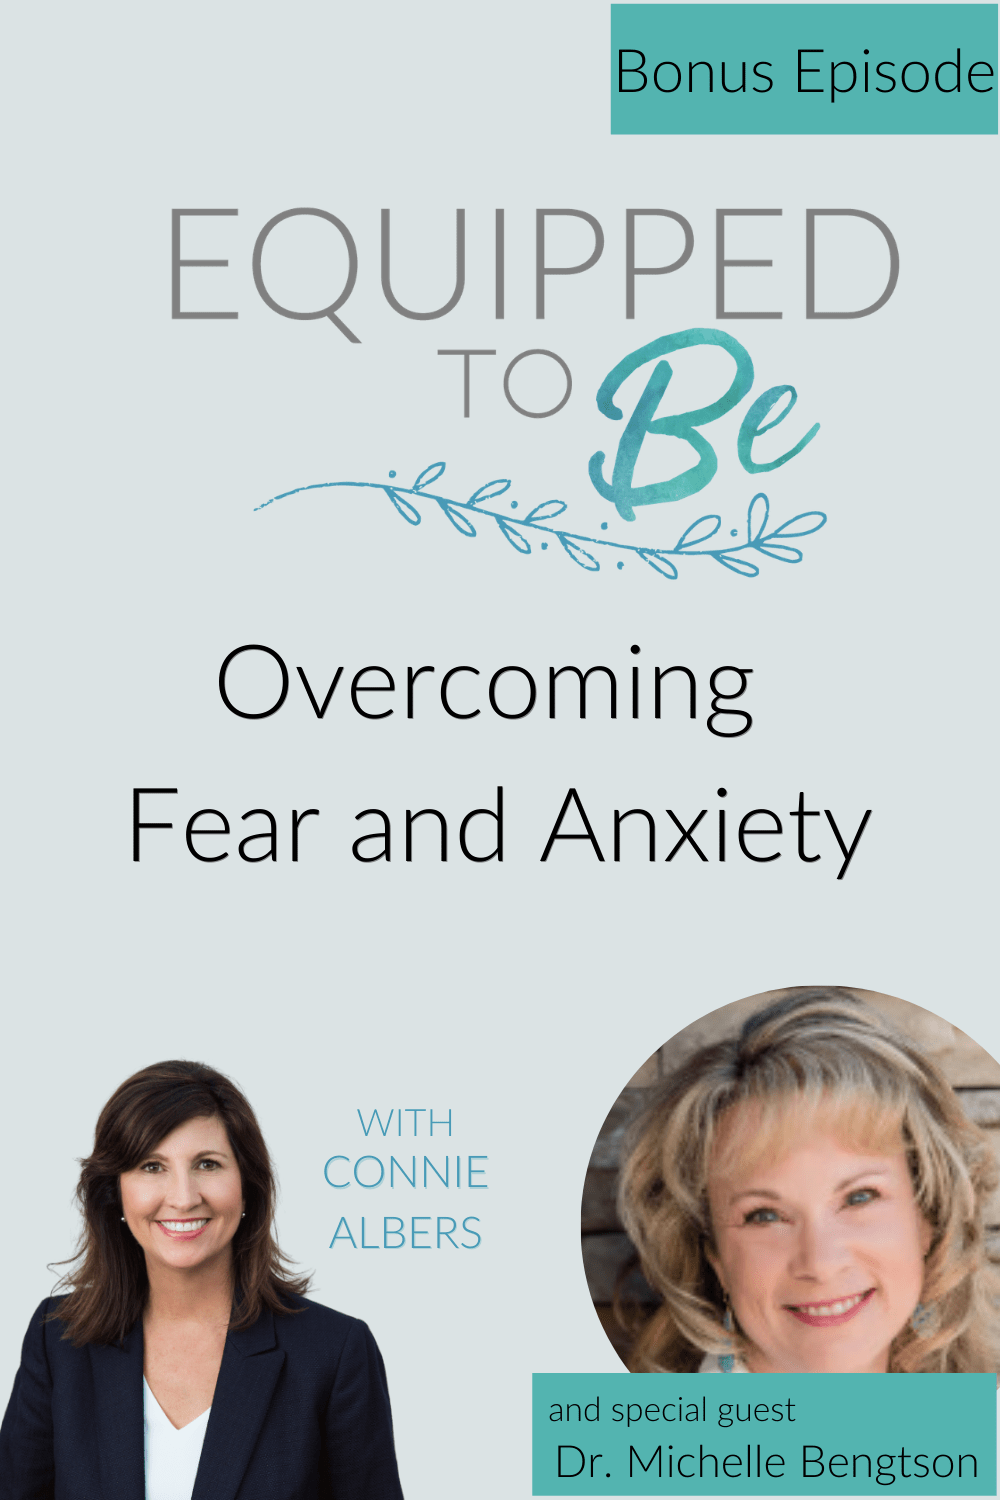 Bonus: Overcoming Fear and Anxiety with Dr. Michelle Bengtson